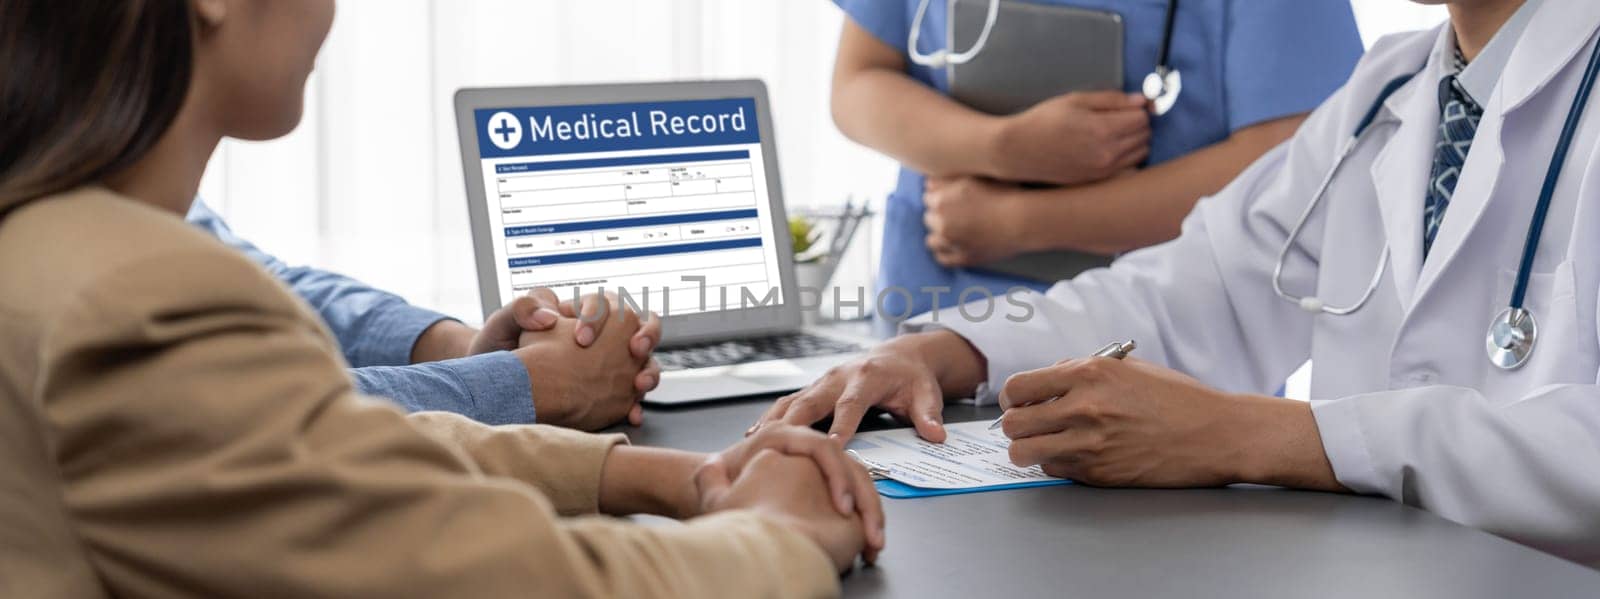 Doctor show medical diagnosis report on laptop to young couple. Neoteric by biancoblue